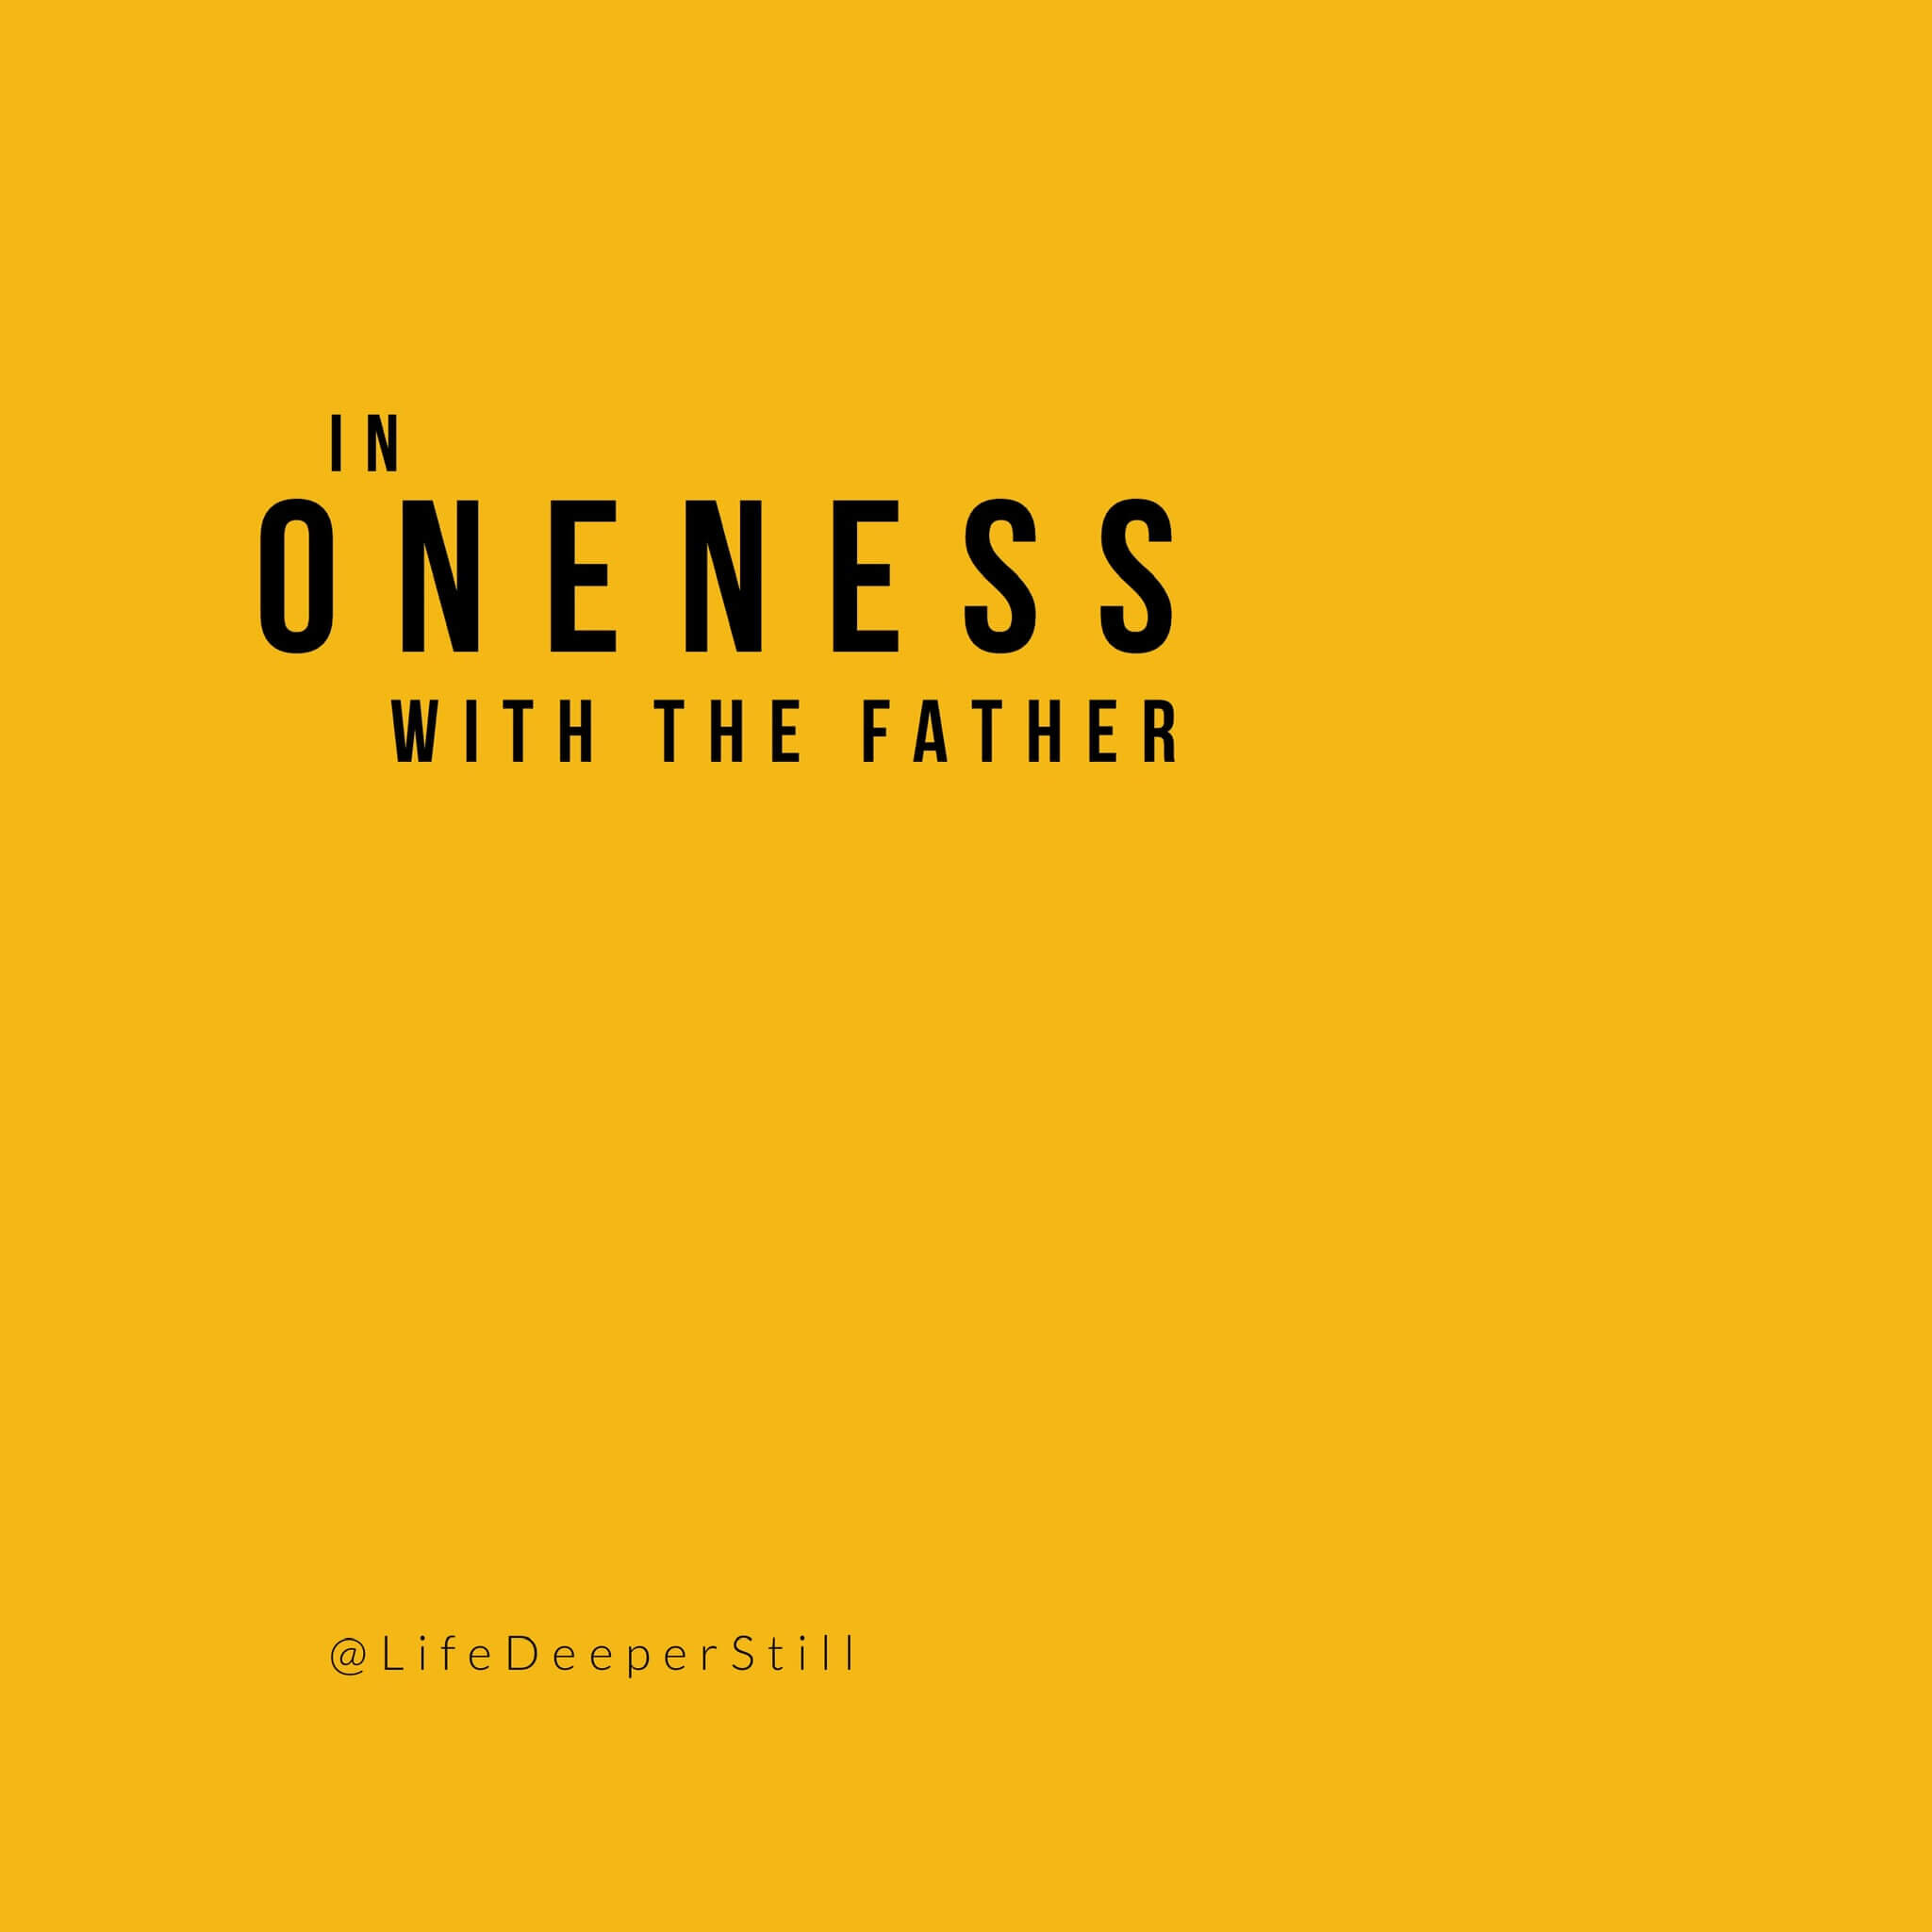 oneness-with-the-father-lifedeeperstill-blog-oneness.jpeg